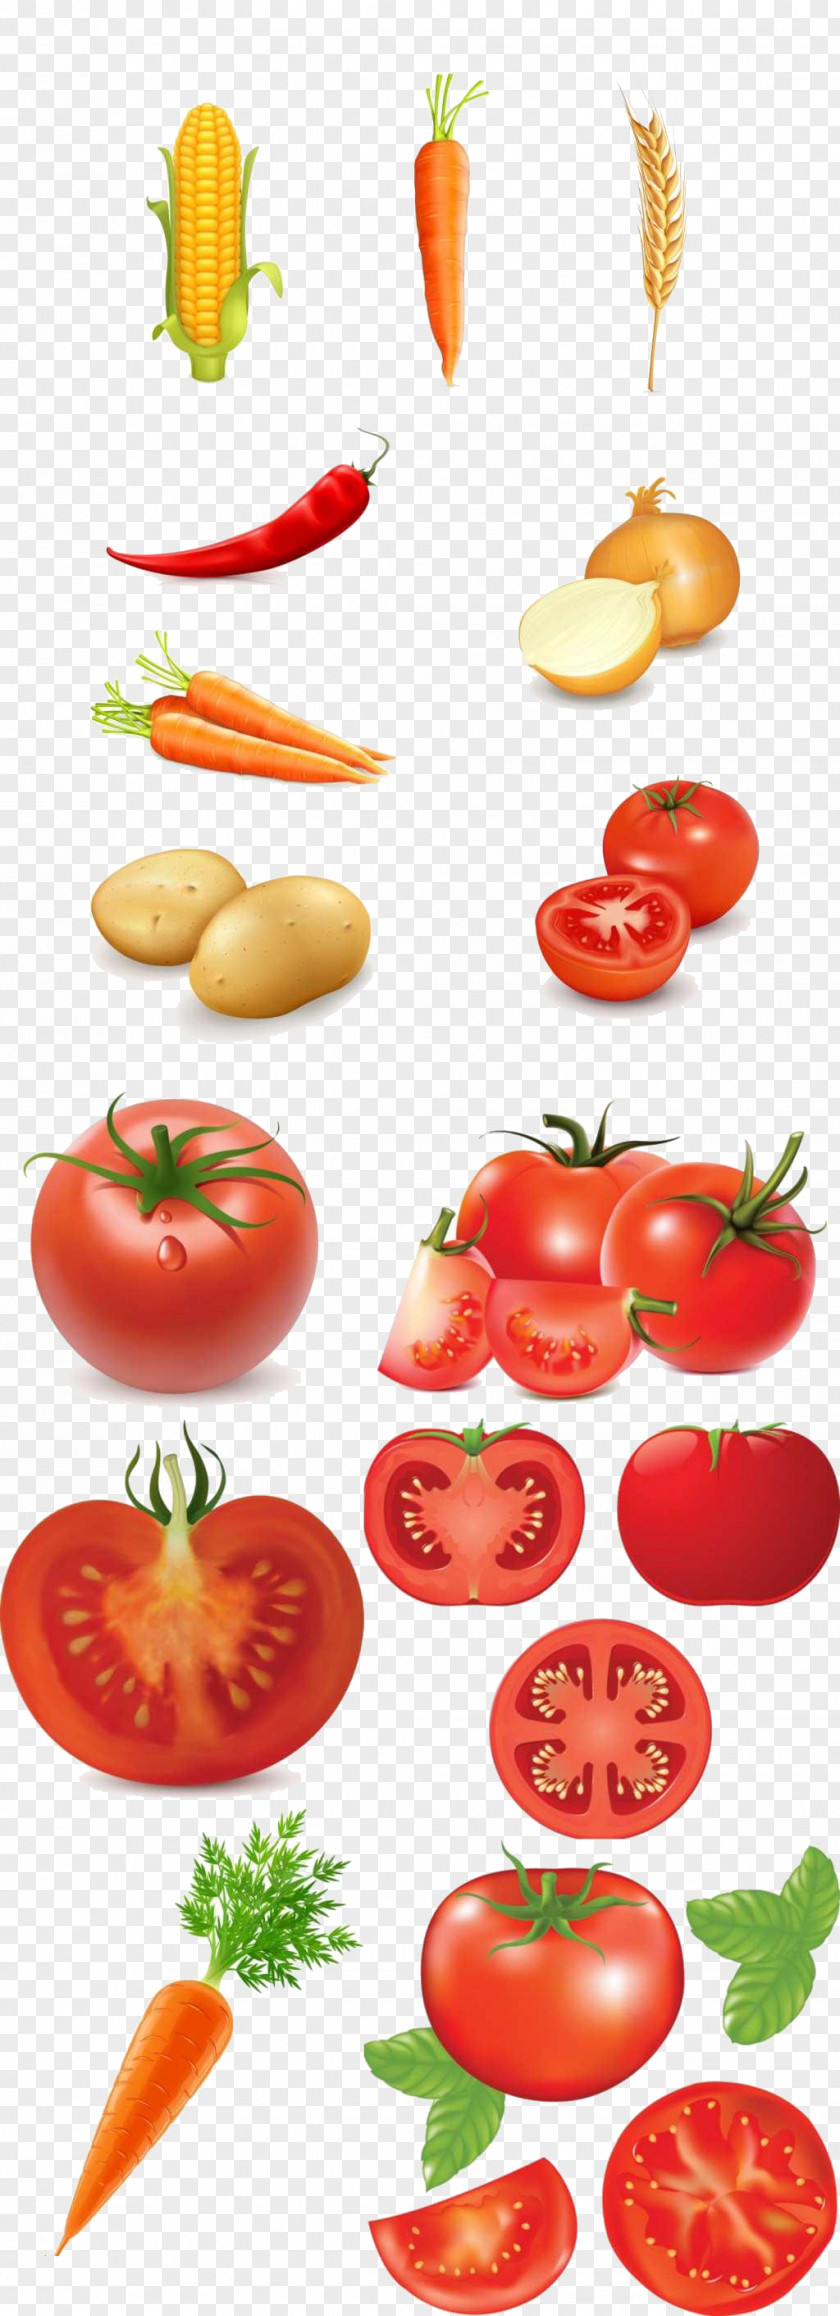 Vegetables Of All Kinds Elements Cherry Tomato Stir-fried And Scrambled Eggs Vegetable Food PNG